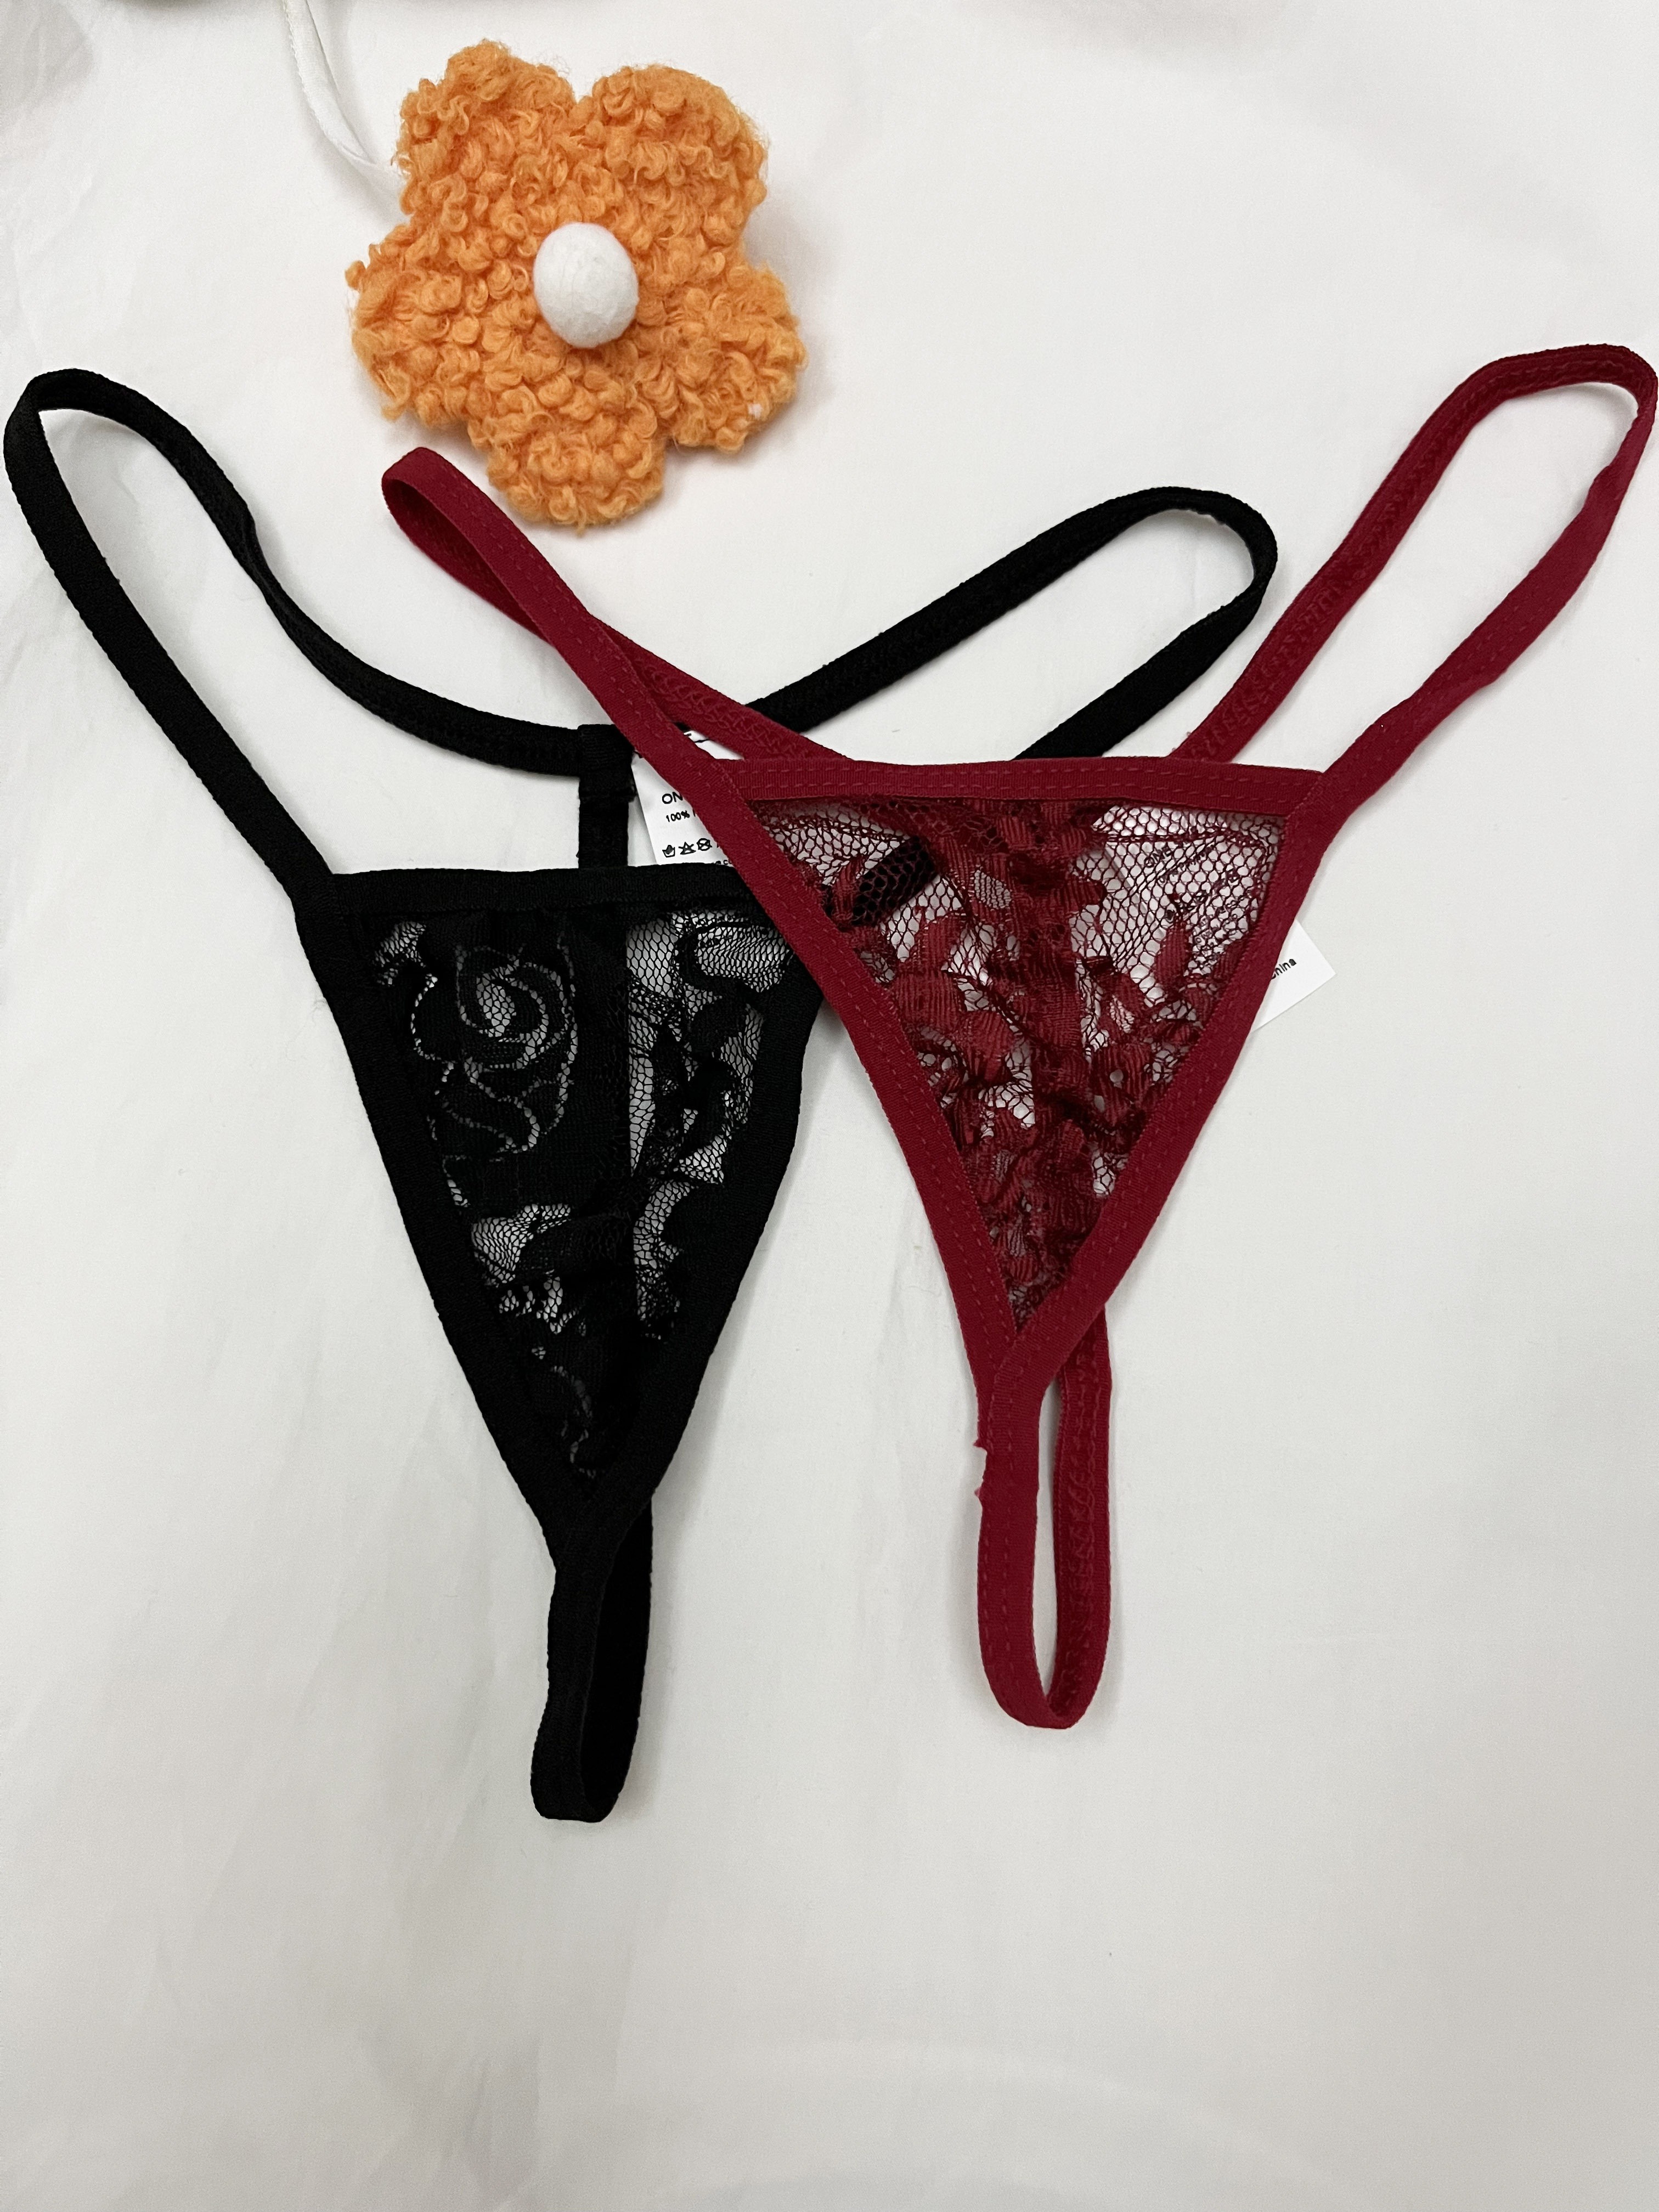  Women Sexy Cheeky Foral Lace Embroidered G-Strings